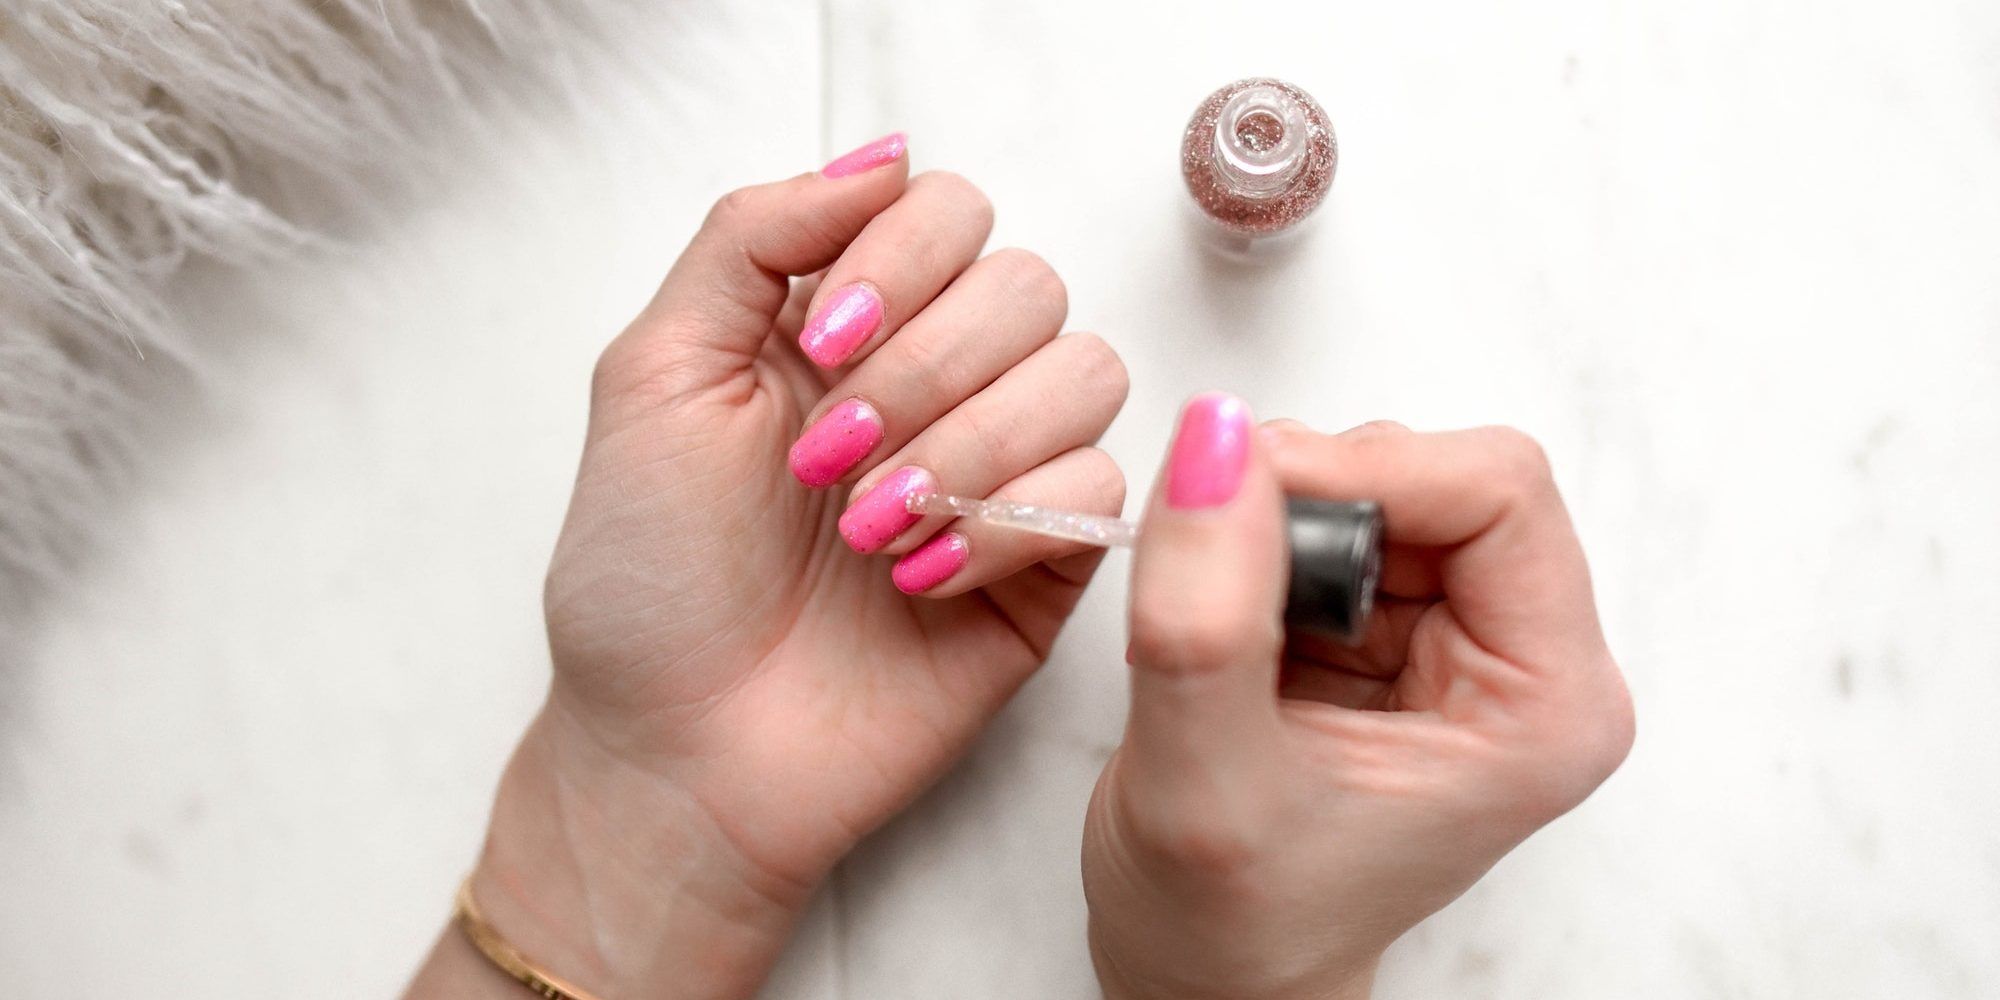 Is it Worth Paying Extra for Gel Nails Rather Than Hybrid? Pros and Cons of Gel  Polish - Beauty and Blush